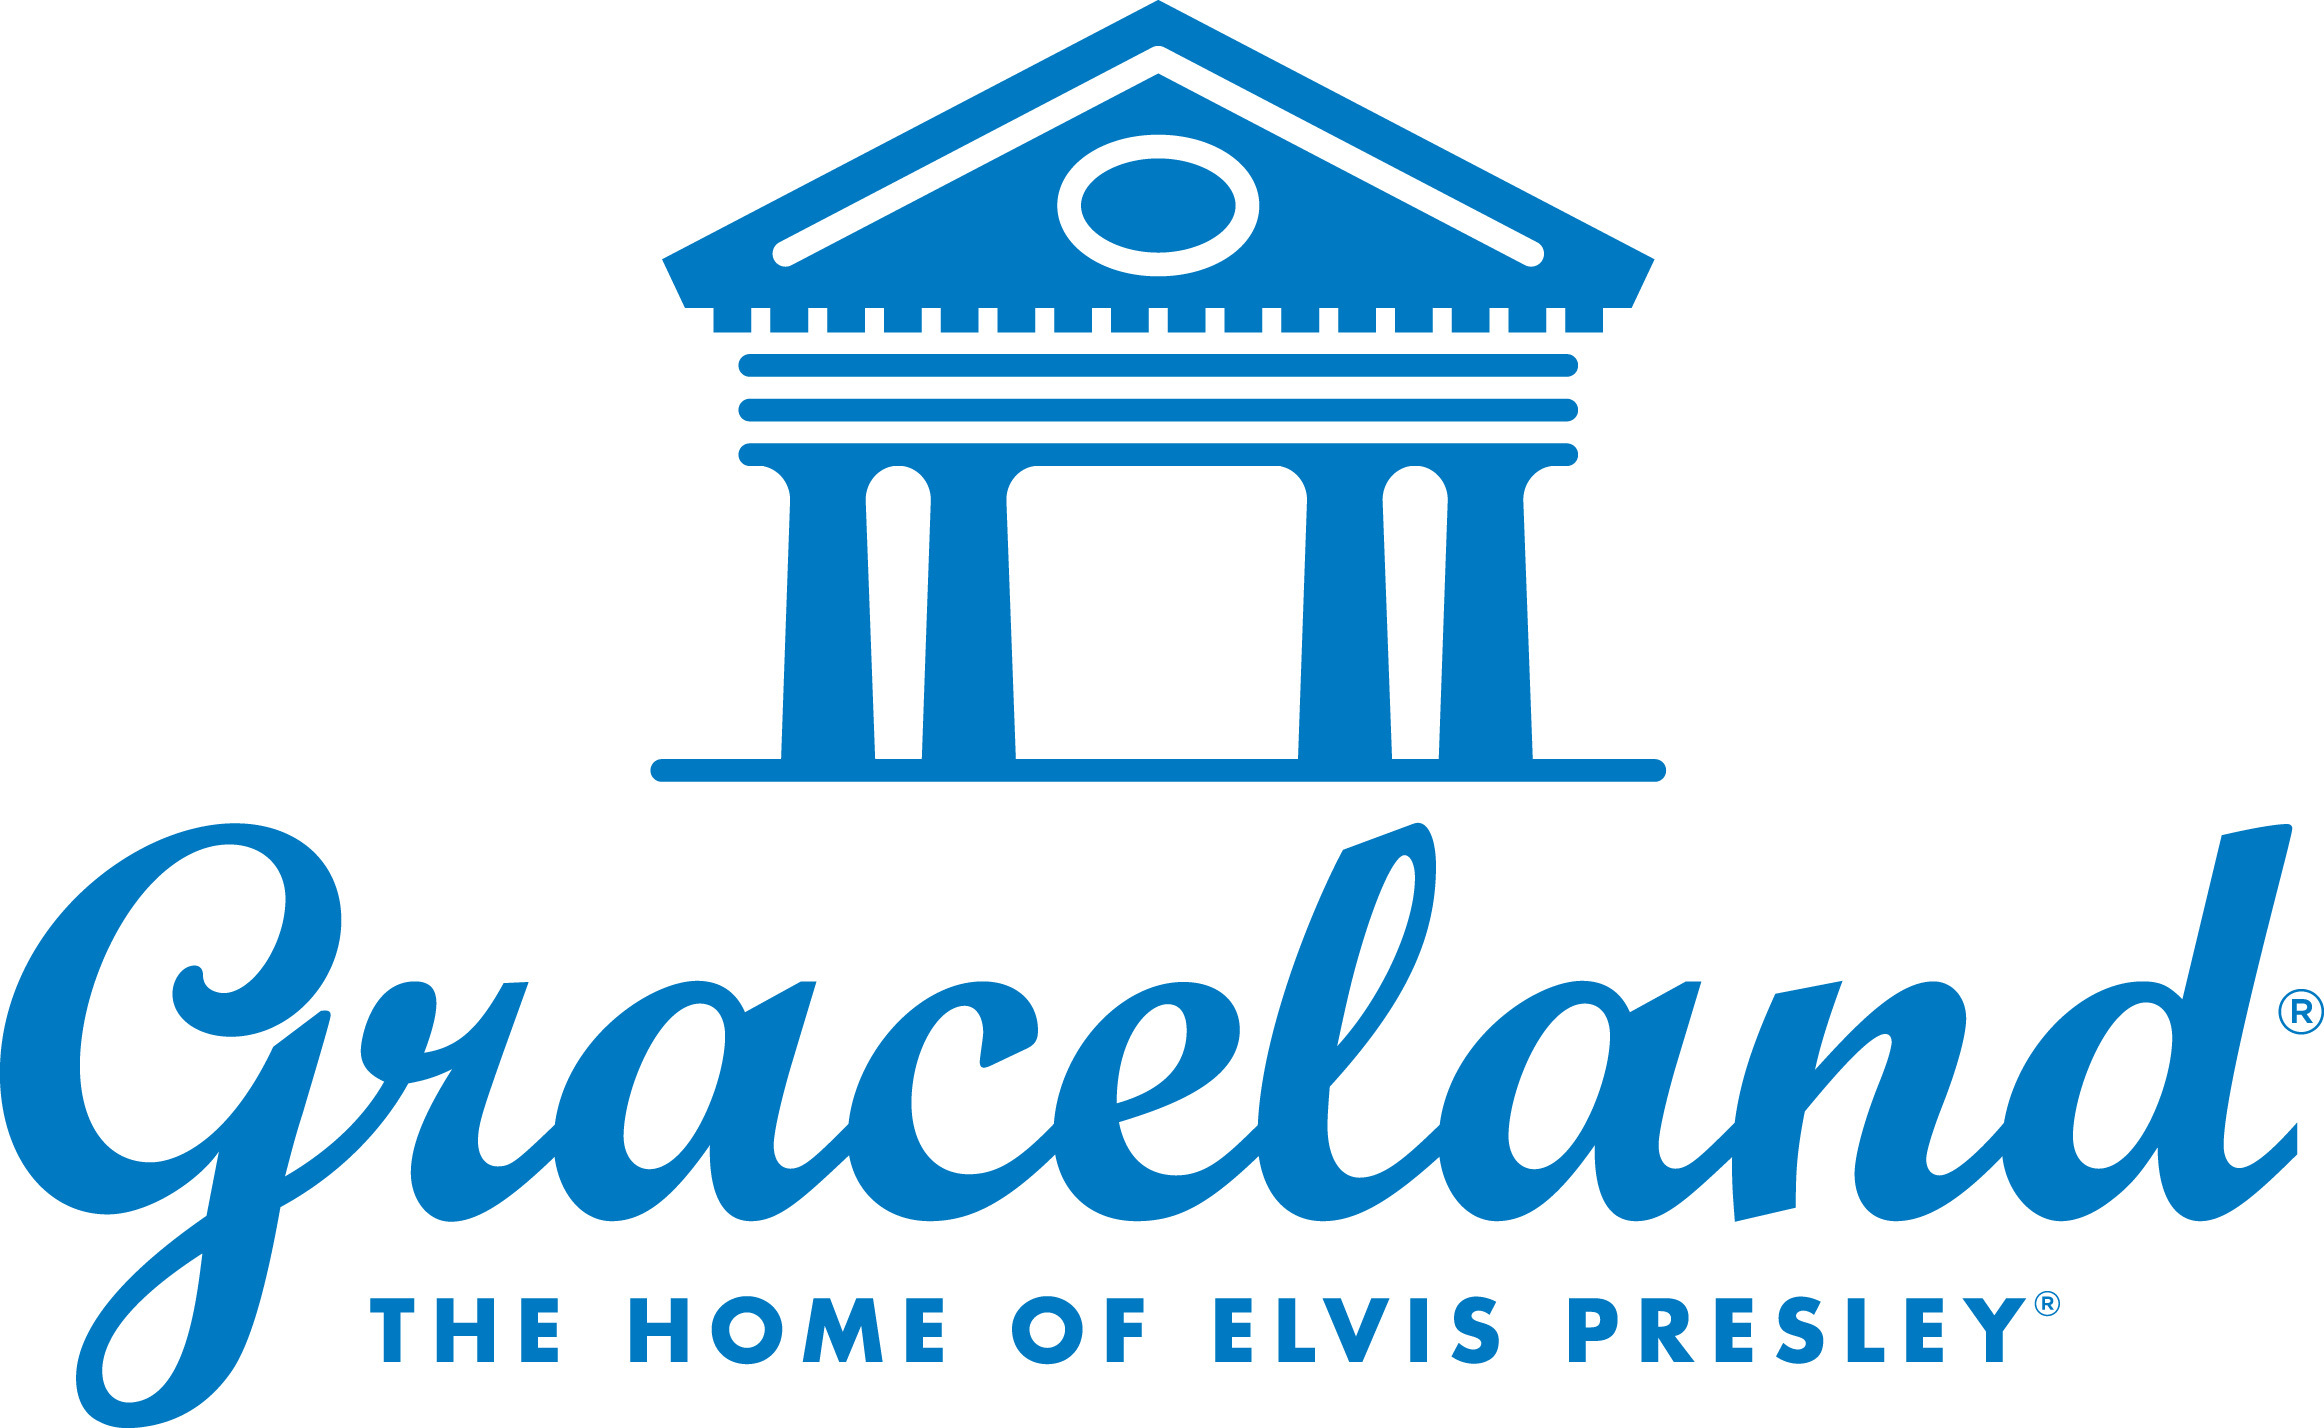 2020 miss usa and 2020 miss teen usa competitions to air live from elvis presley s graceland in november business wire 2020 miss usa and 2020 miss teen usa